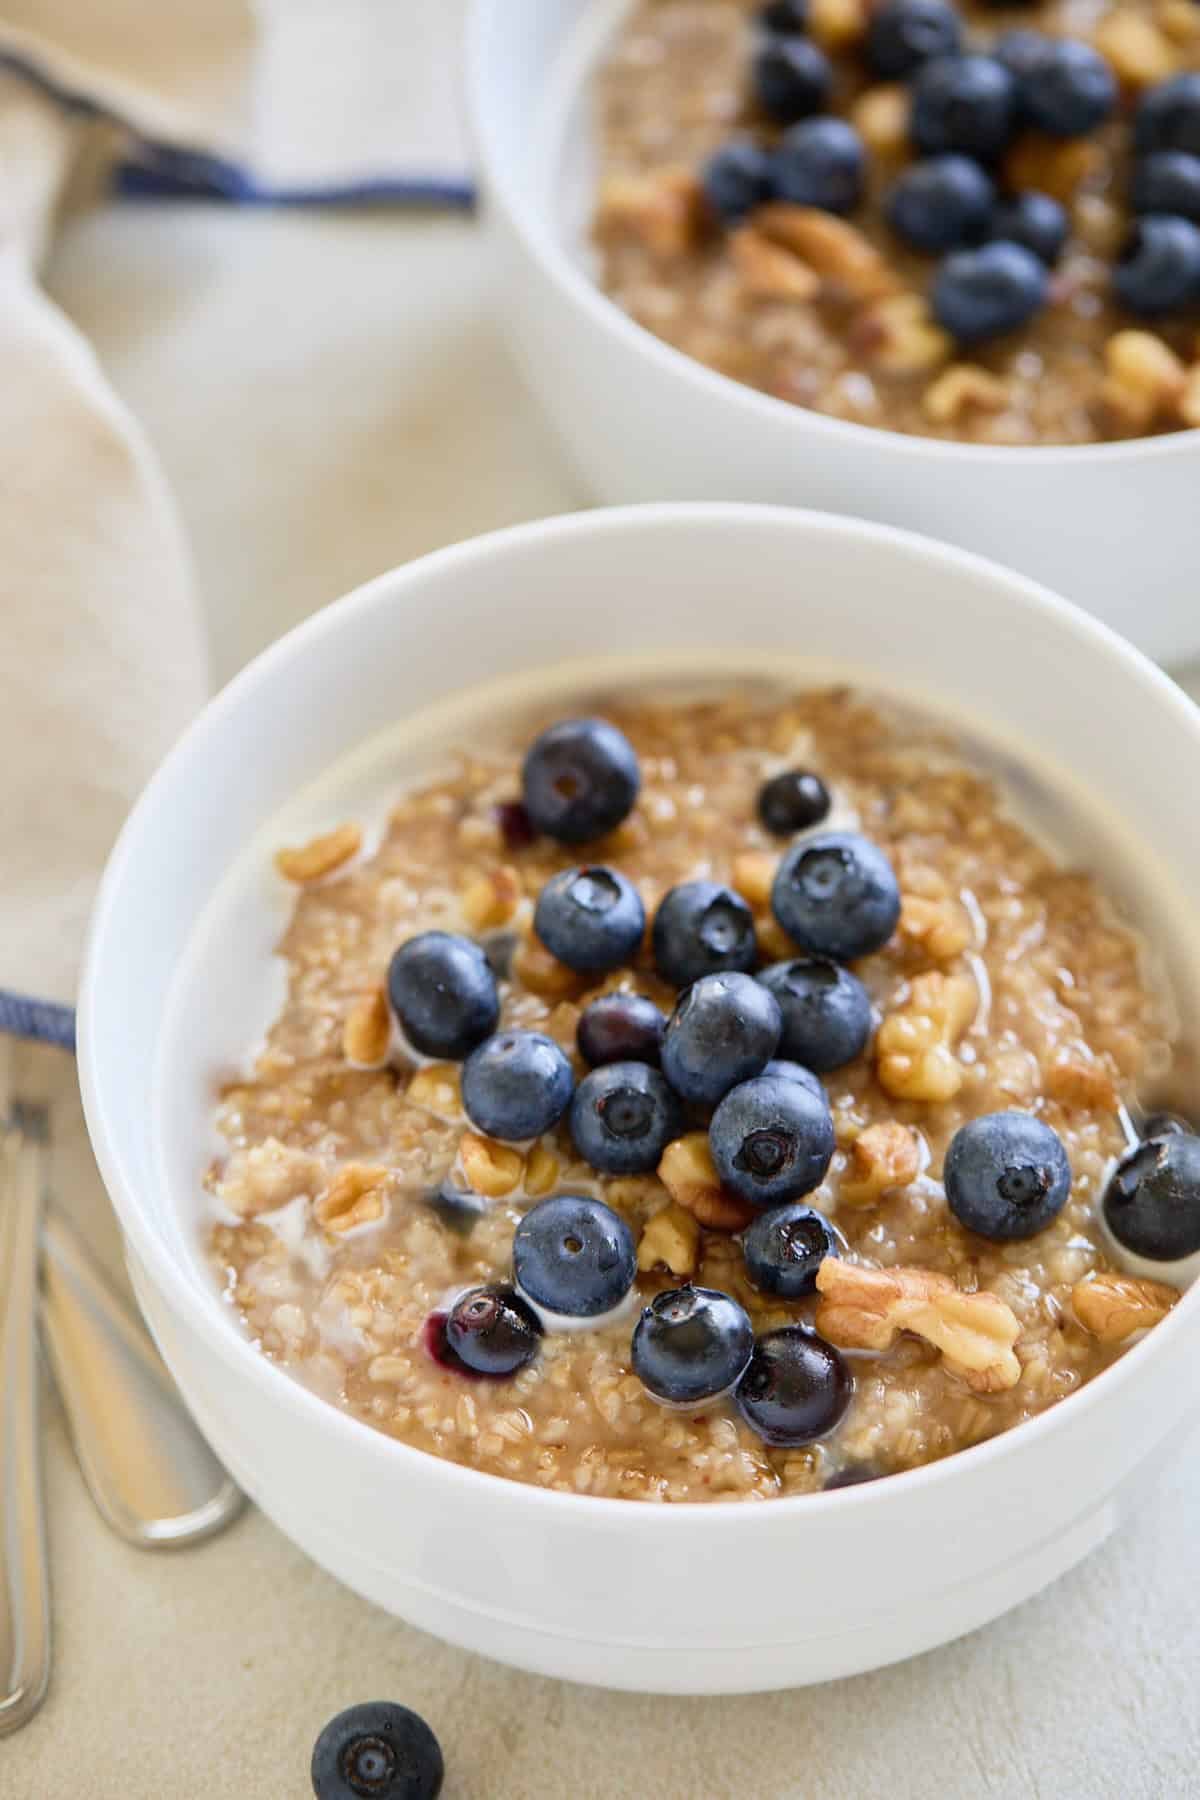 Two bowls of cooked steel cut oats topped with fresh blueberries and walnuts, ready to serve.